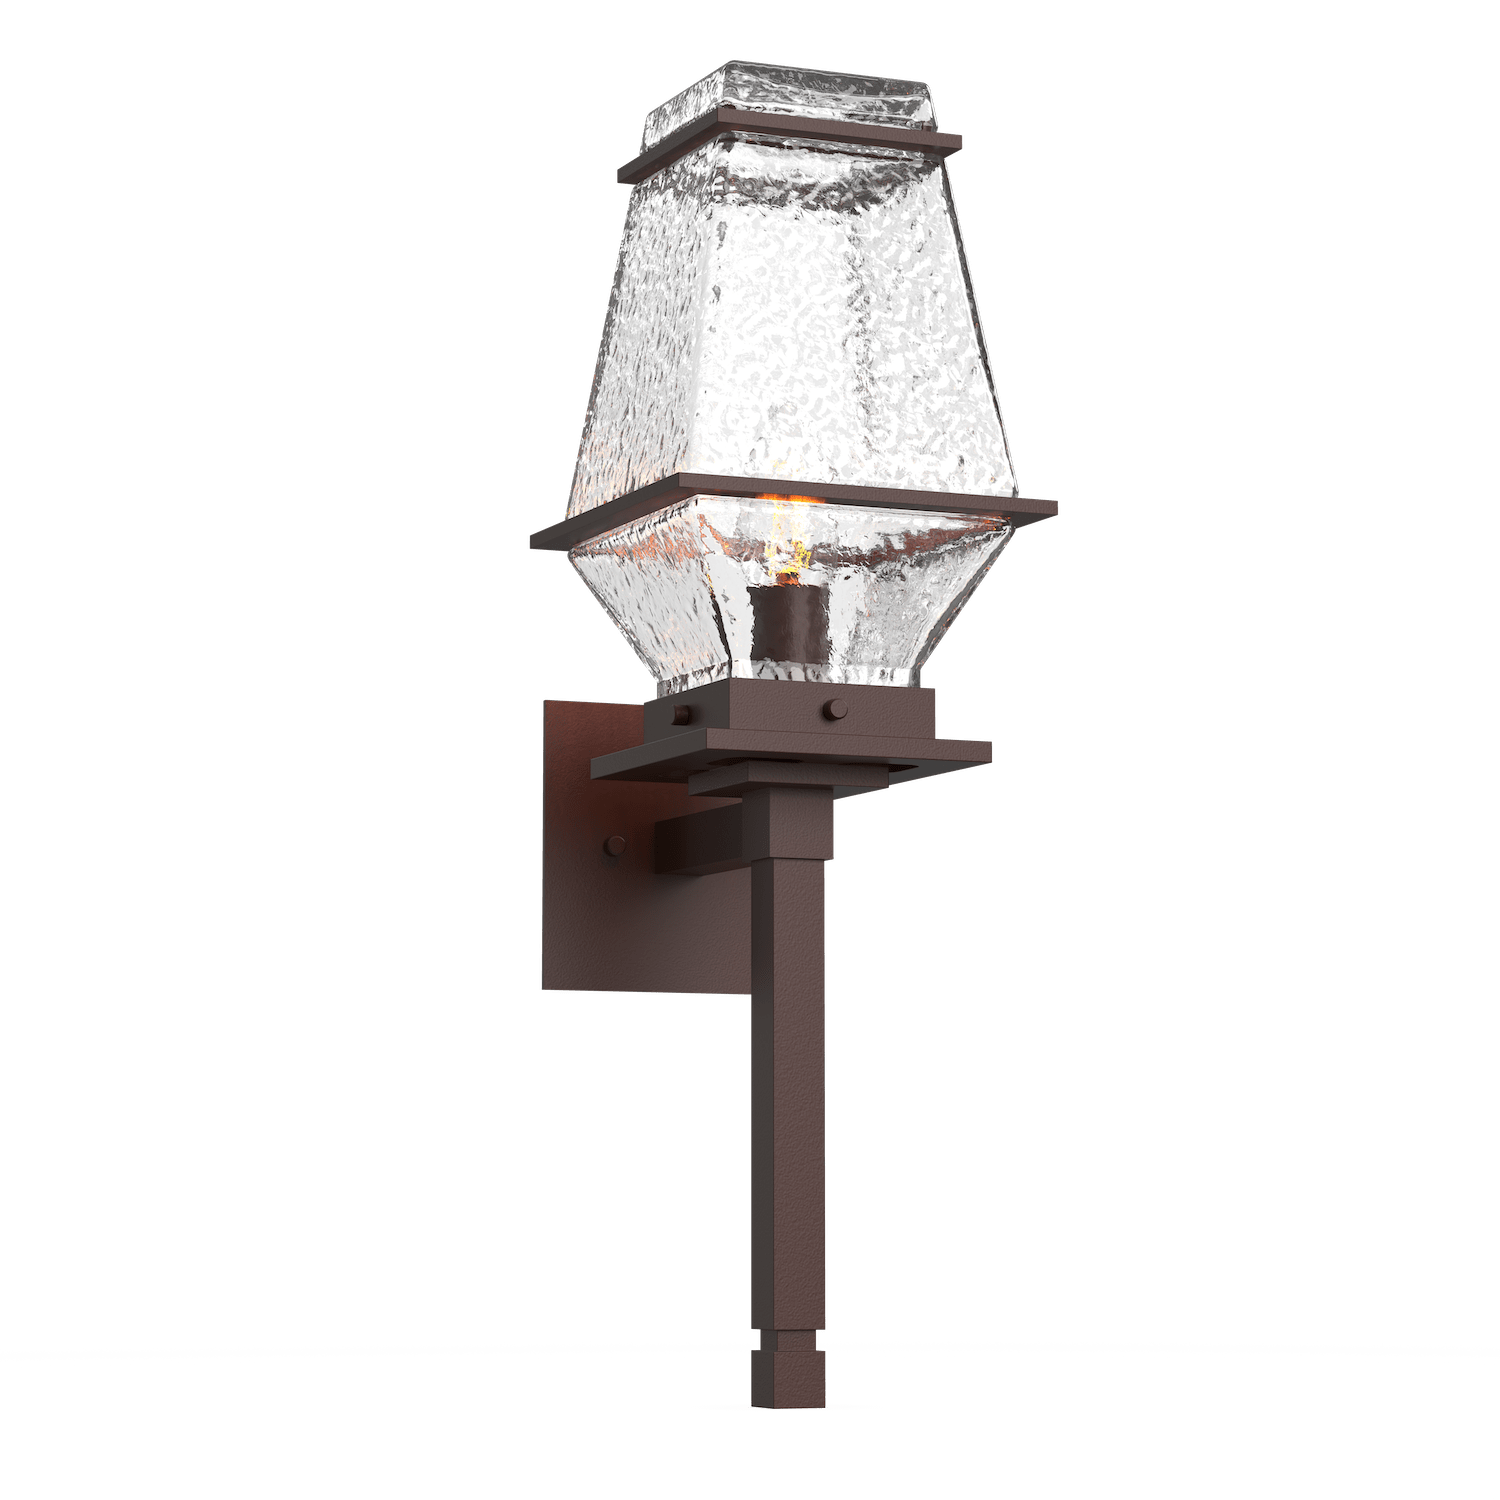 ODB0077-03-SB-C-Hammerton-Studio-Landmark-24-inch-outdoor-torch-sconce-with-statuary-bronze-finish-and-clear-blown-glass-shades-and-incandescent-lamping